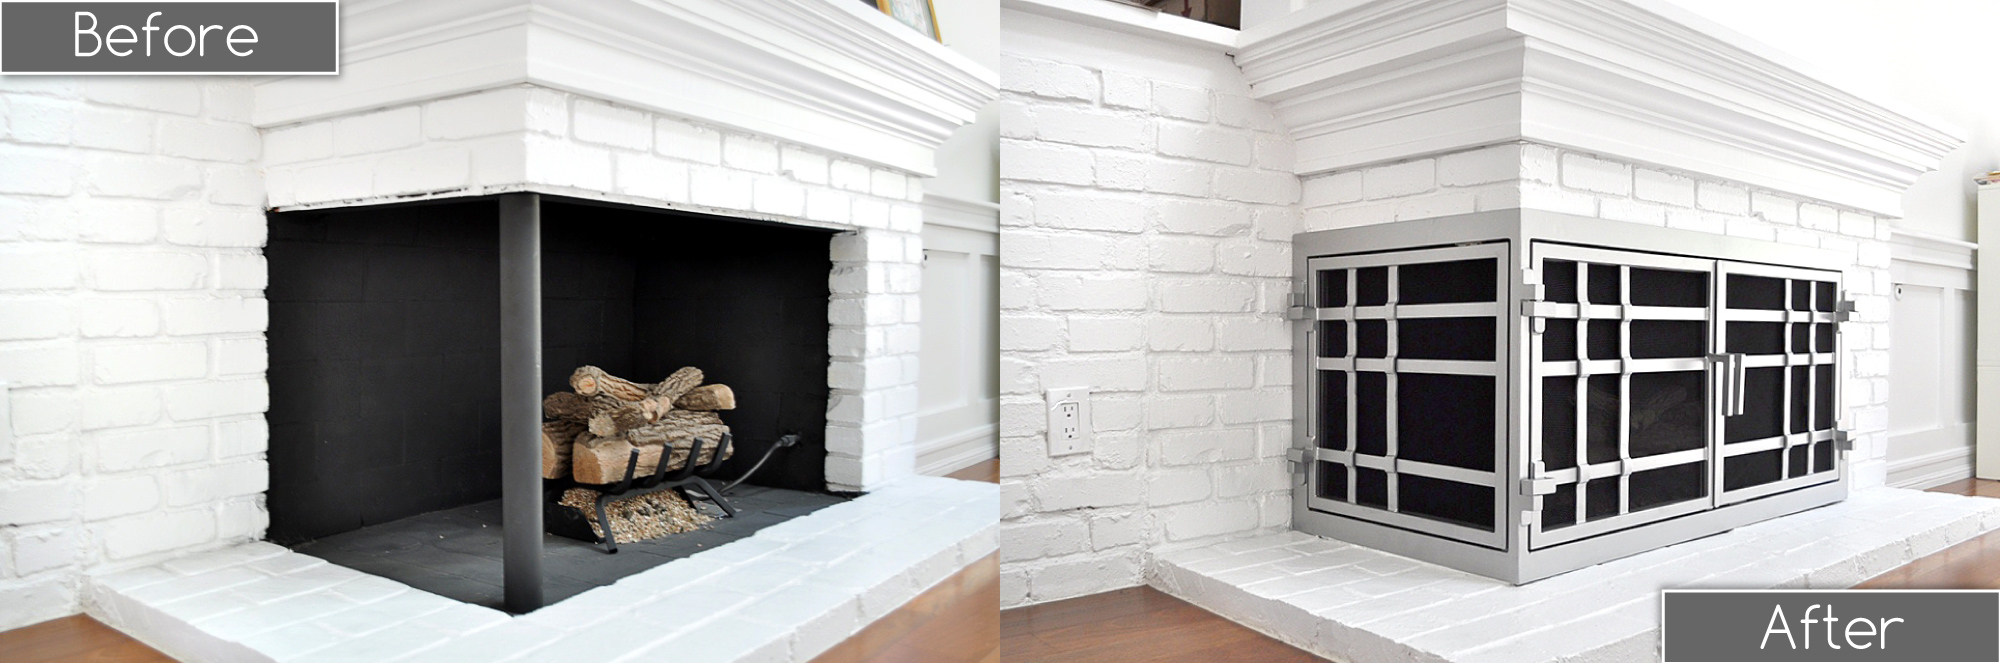 L-Shaped Fireplace Doors Before and After